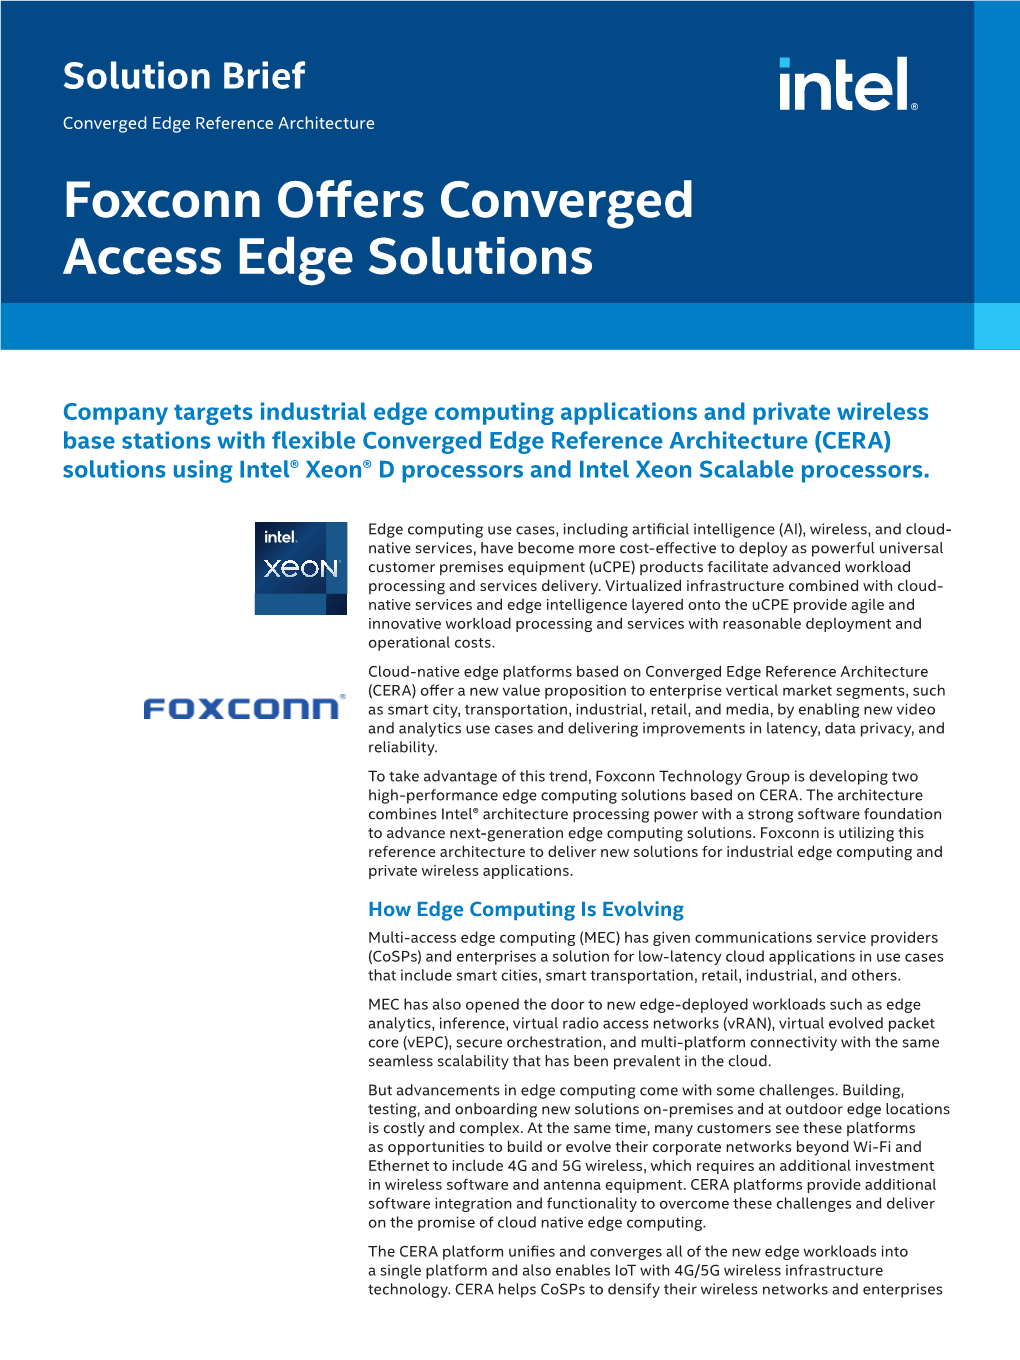 Foxconn Offers Converged Access Edge Solutions